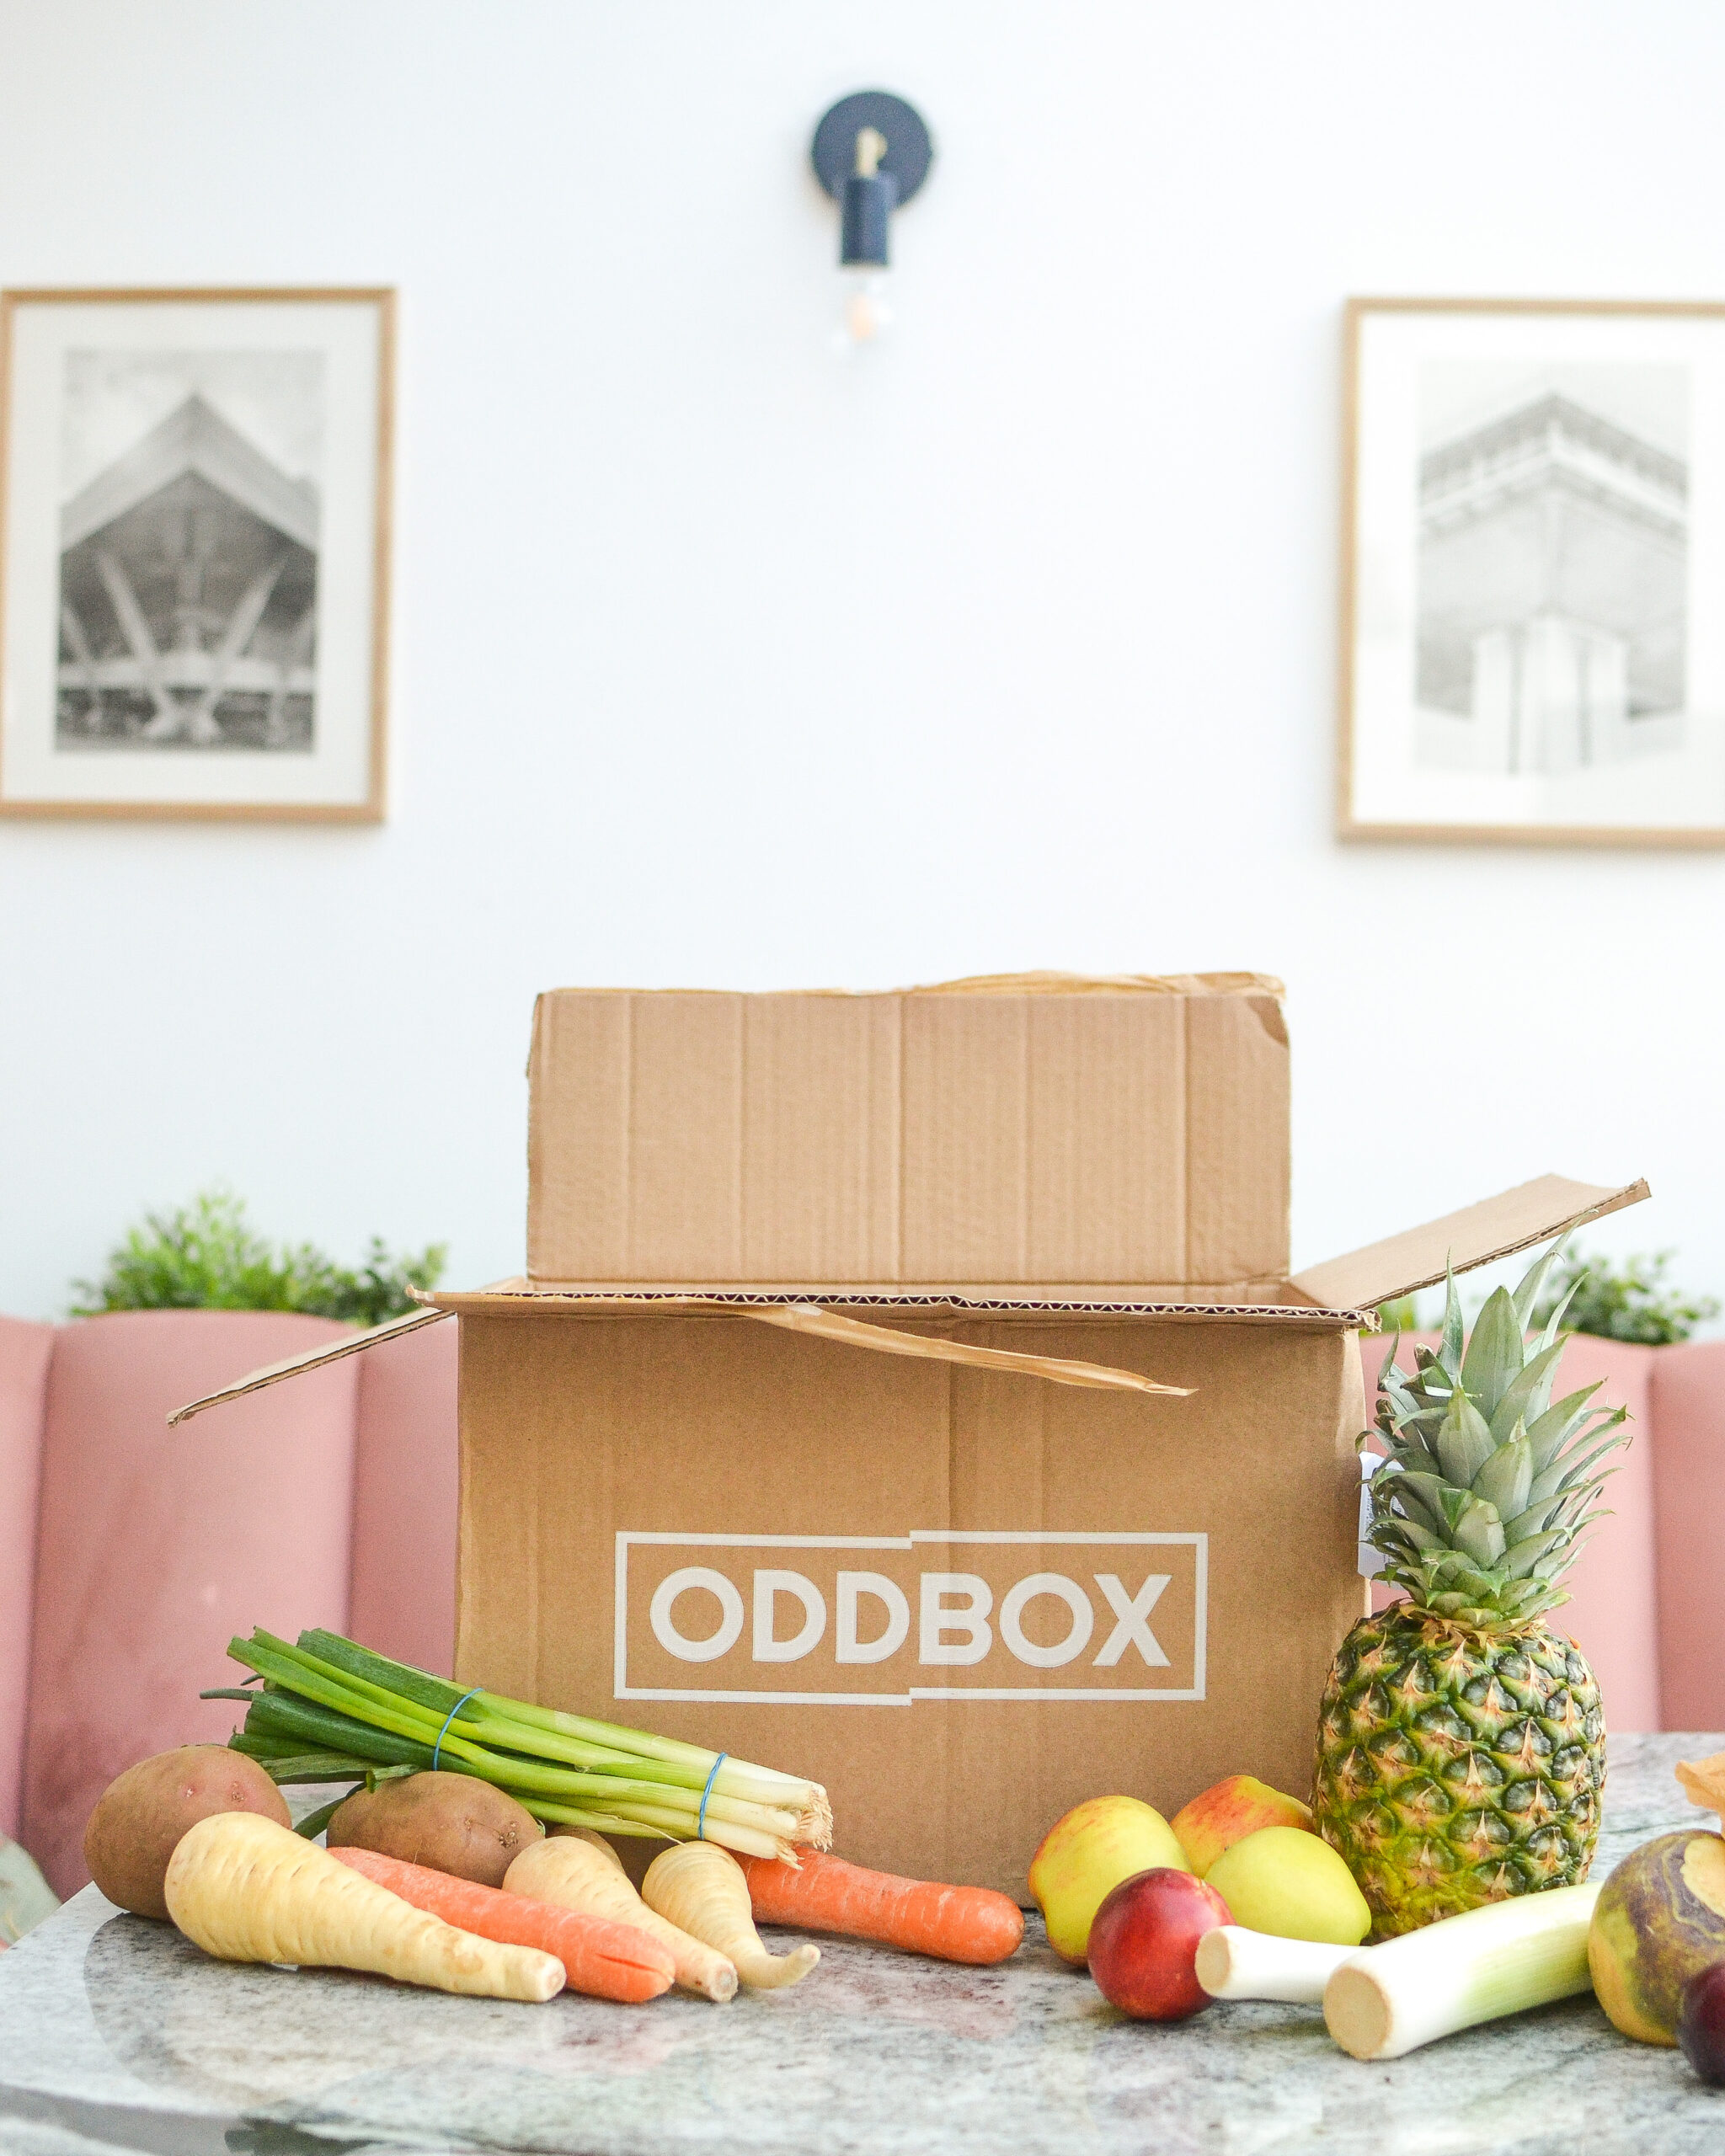 OddBox Fruit and Veg Delivery Box